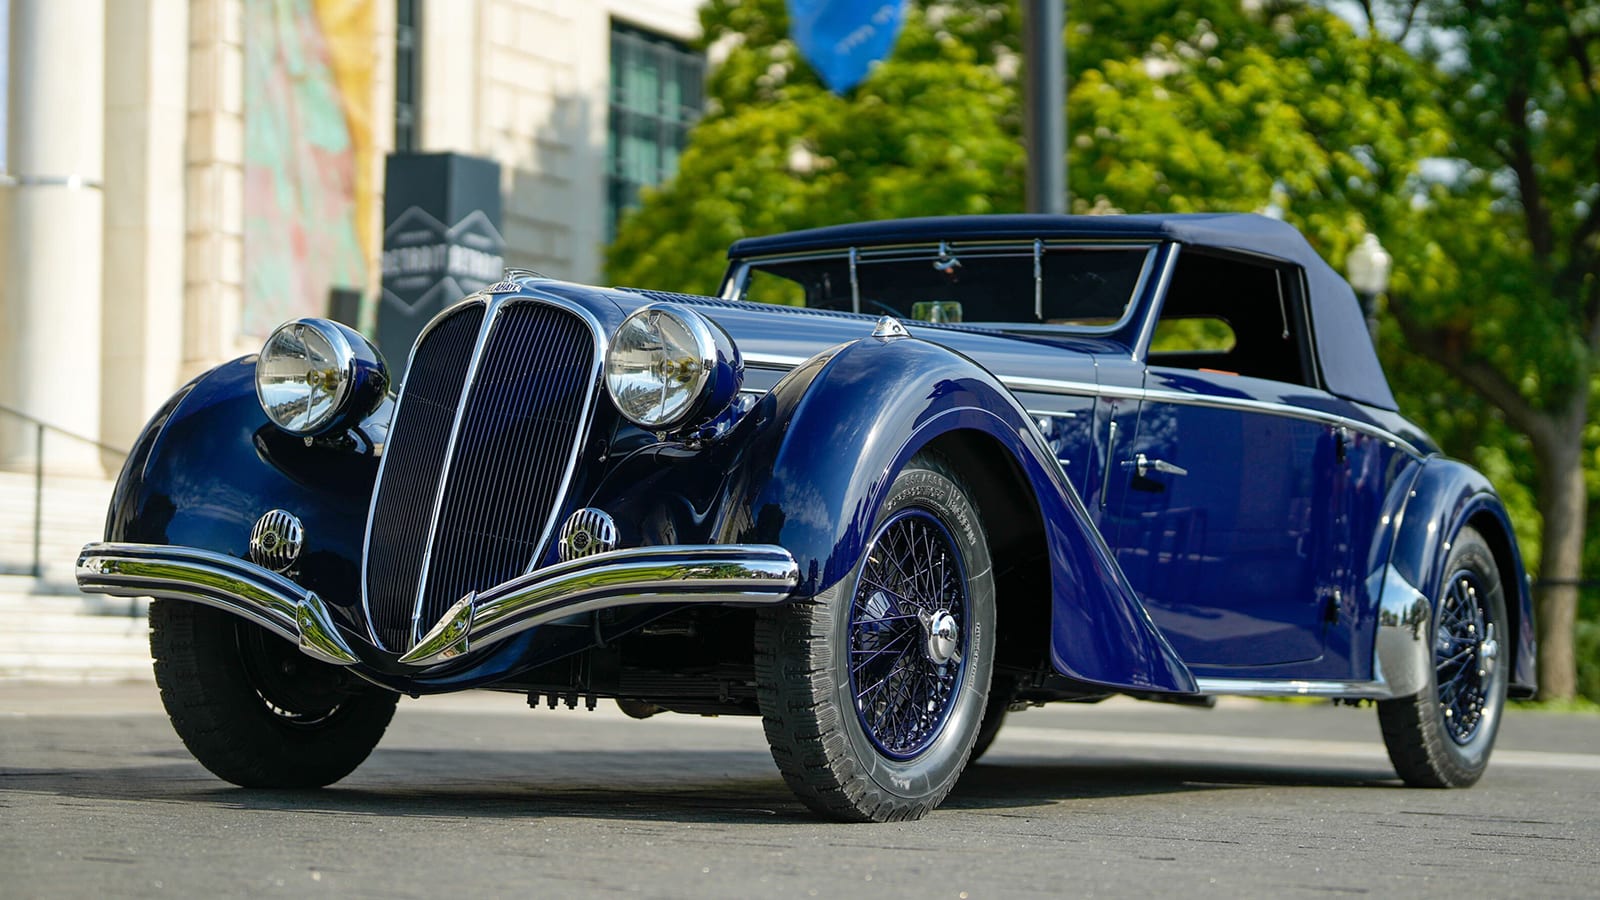 2022 Detroit Concours Weekend Mega Gallery | Kicking back with classics